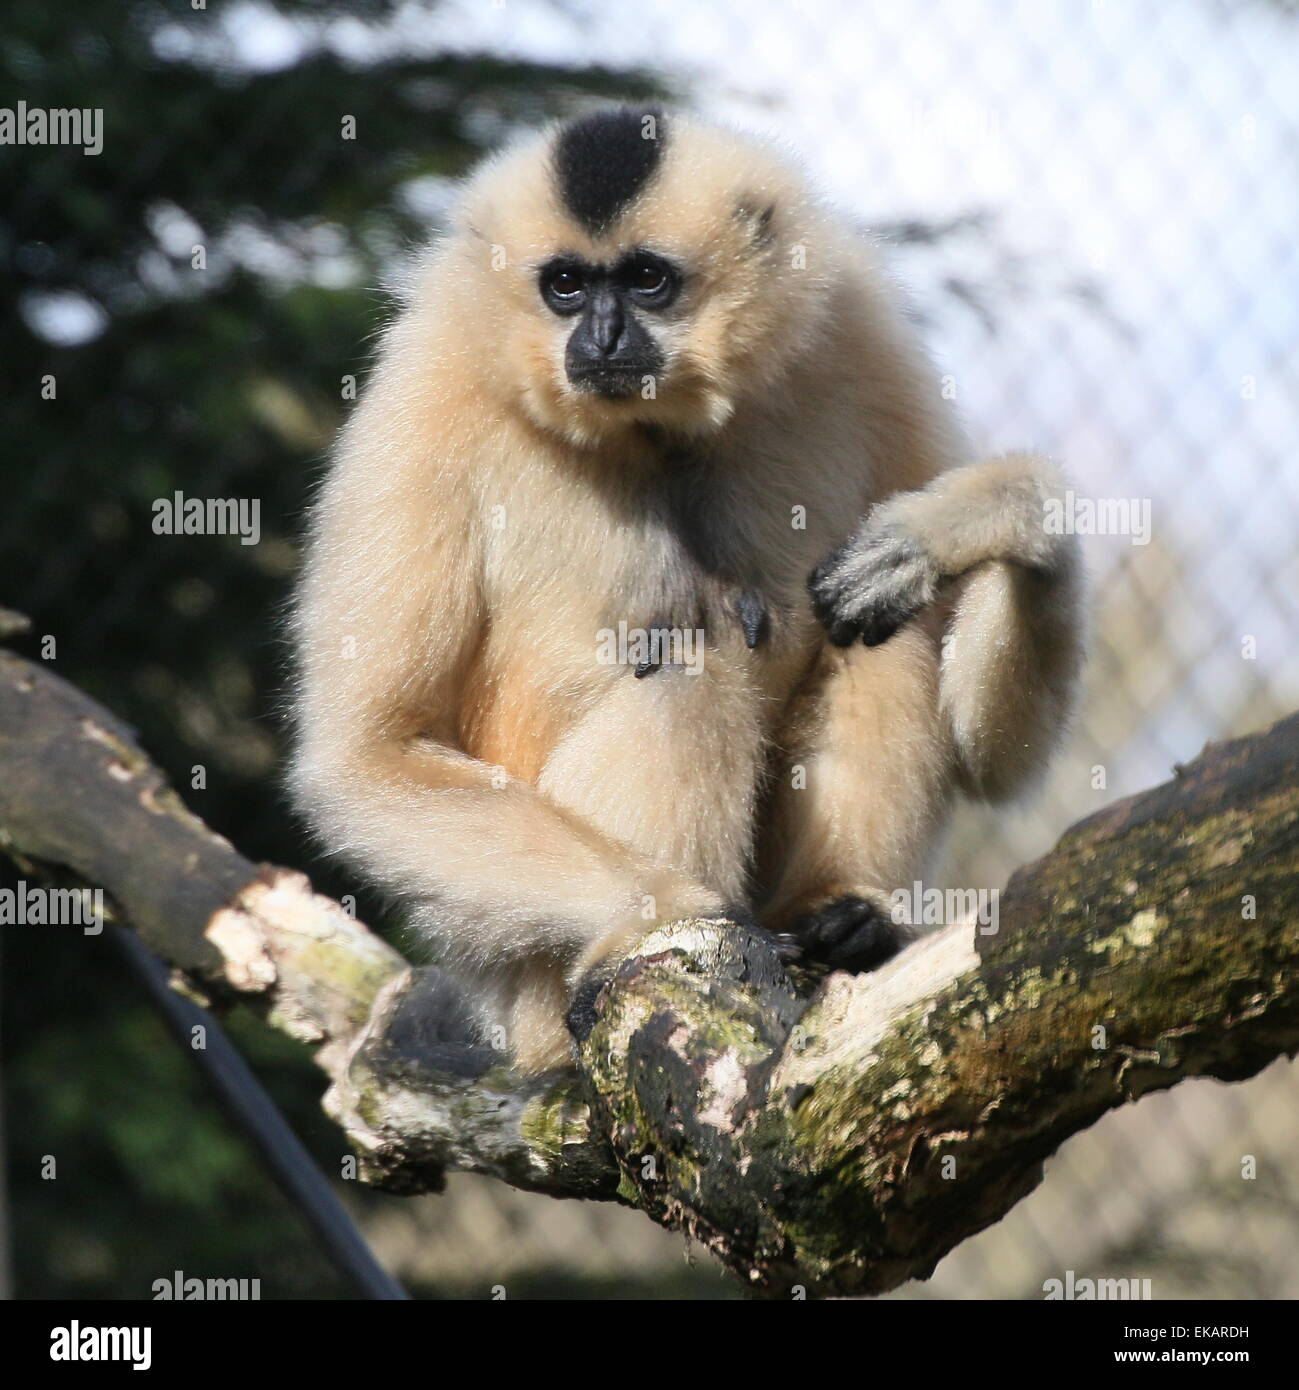 Female Yellow cheeked gibbon (Nomascus gabriellae), a.k.a. golden-cheeked crested gibbon. Burgers' Zoo, Netherlands Stock Photo